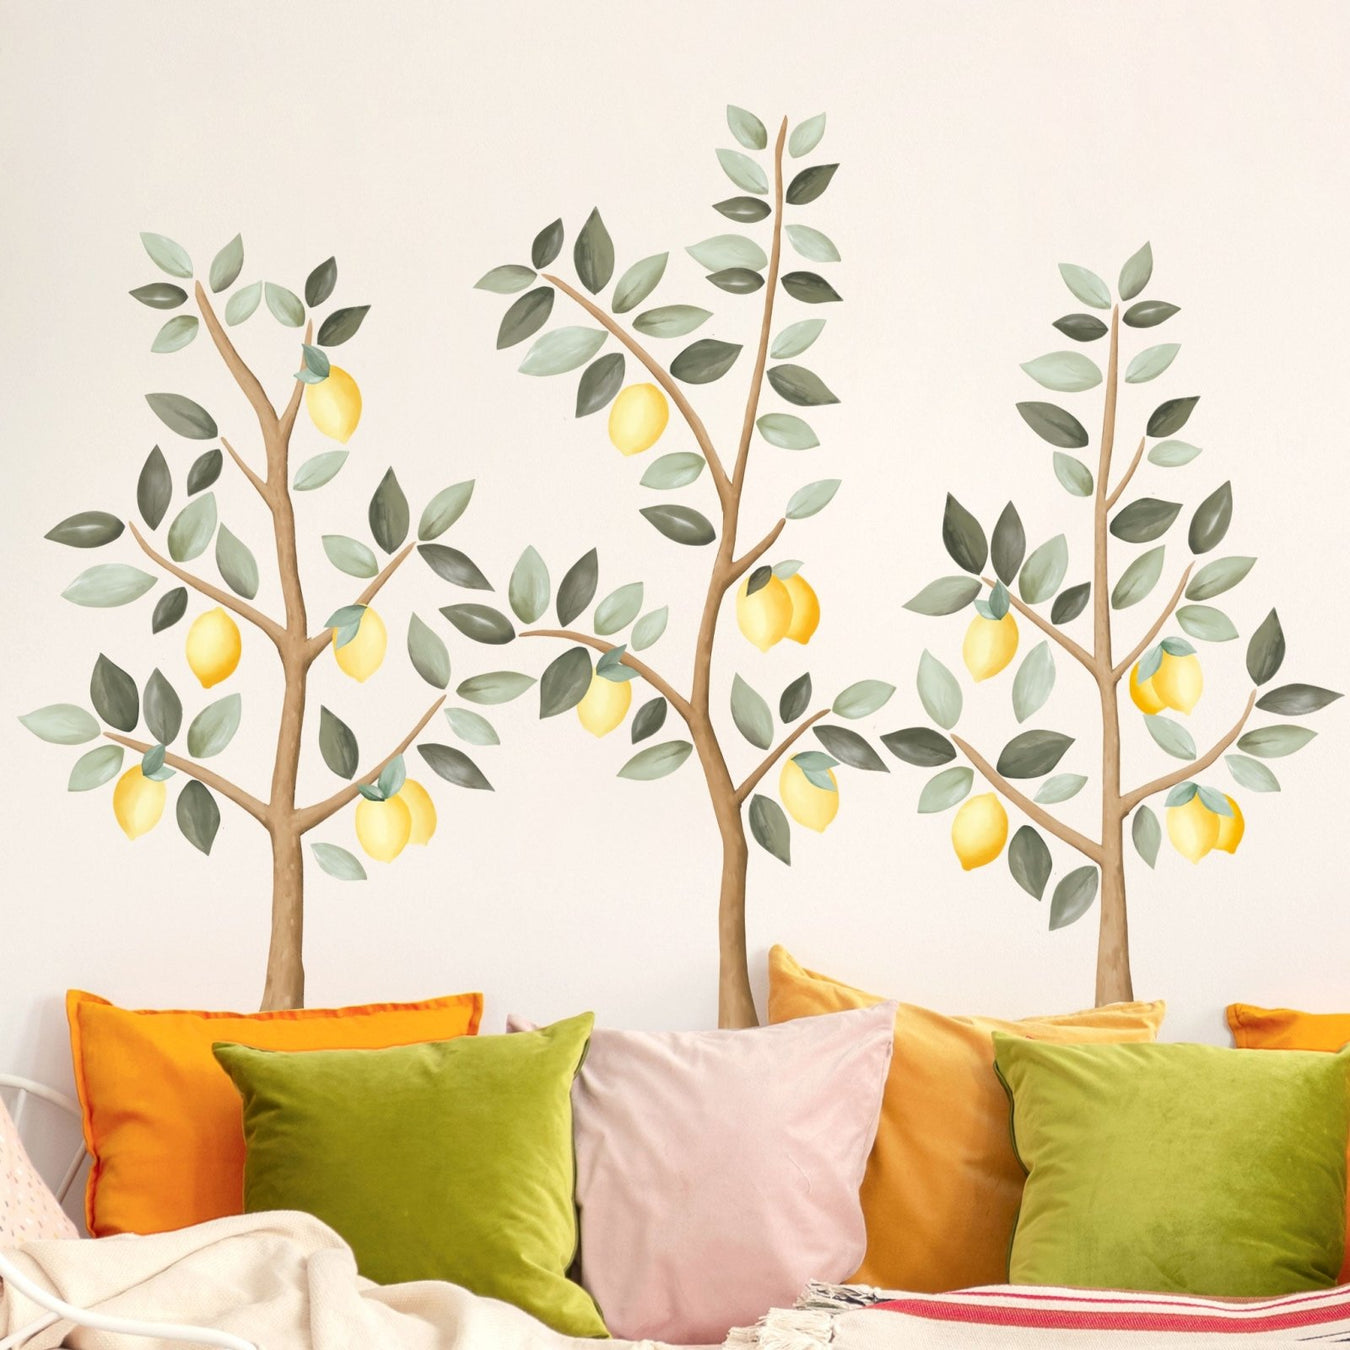 Plants & Fruits Wall Stickers - Made of Sundays